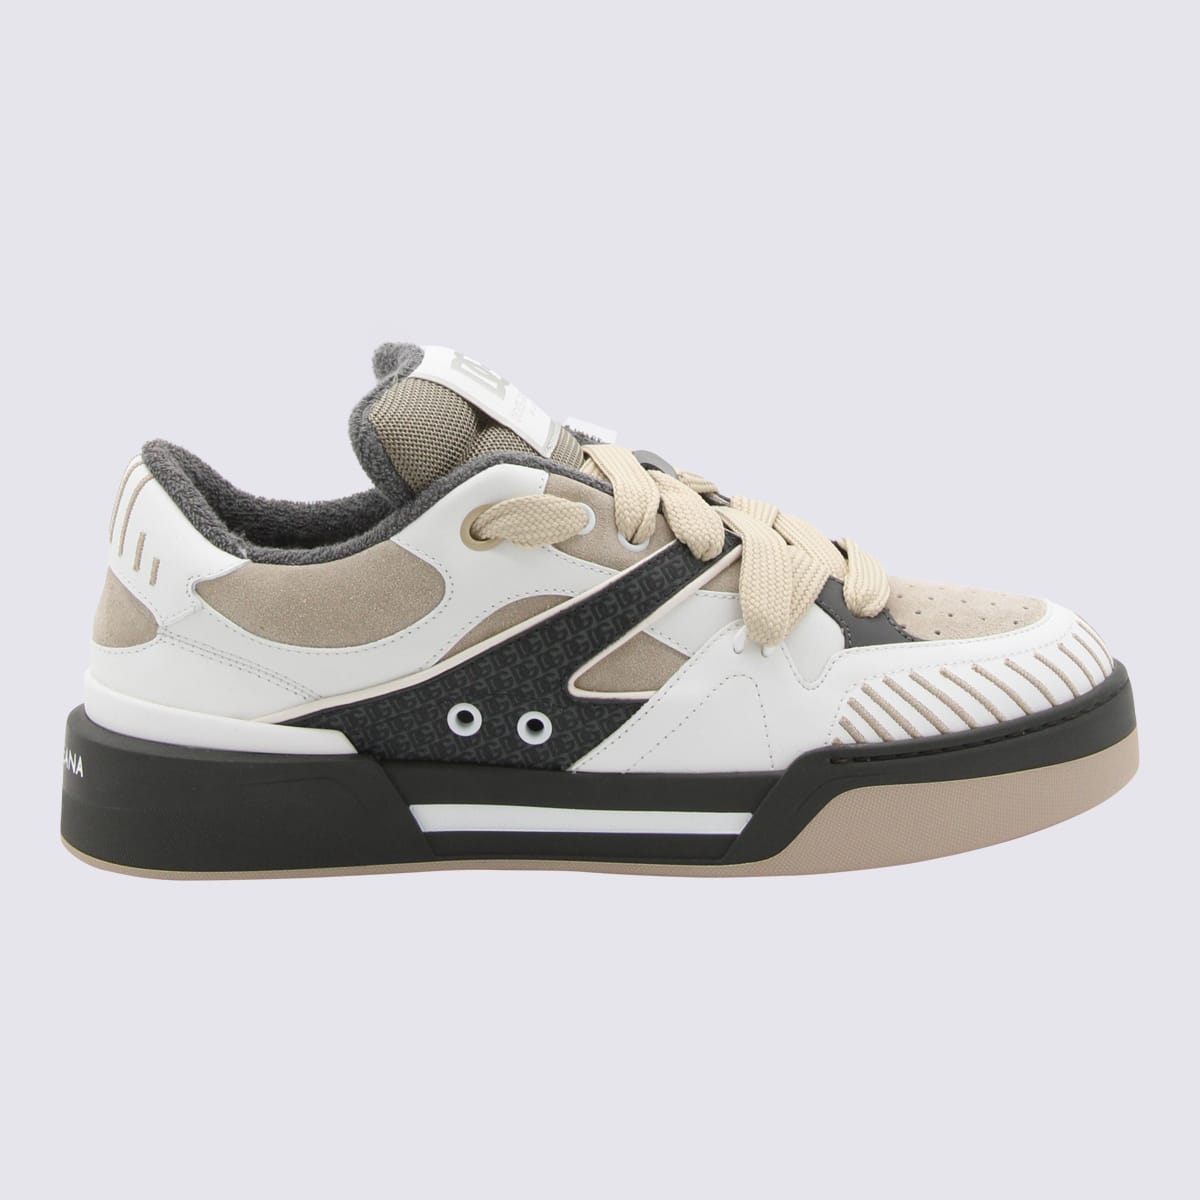 DOLCE & GABBANA TAUPE AND WHITE LEATHER NEW ROMA SNEAKERS